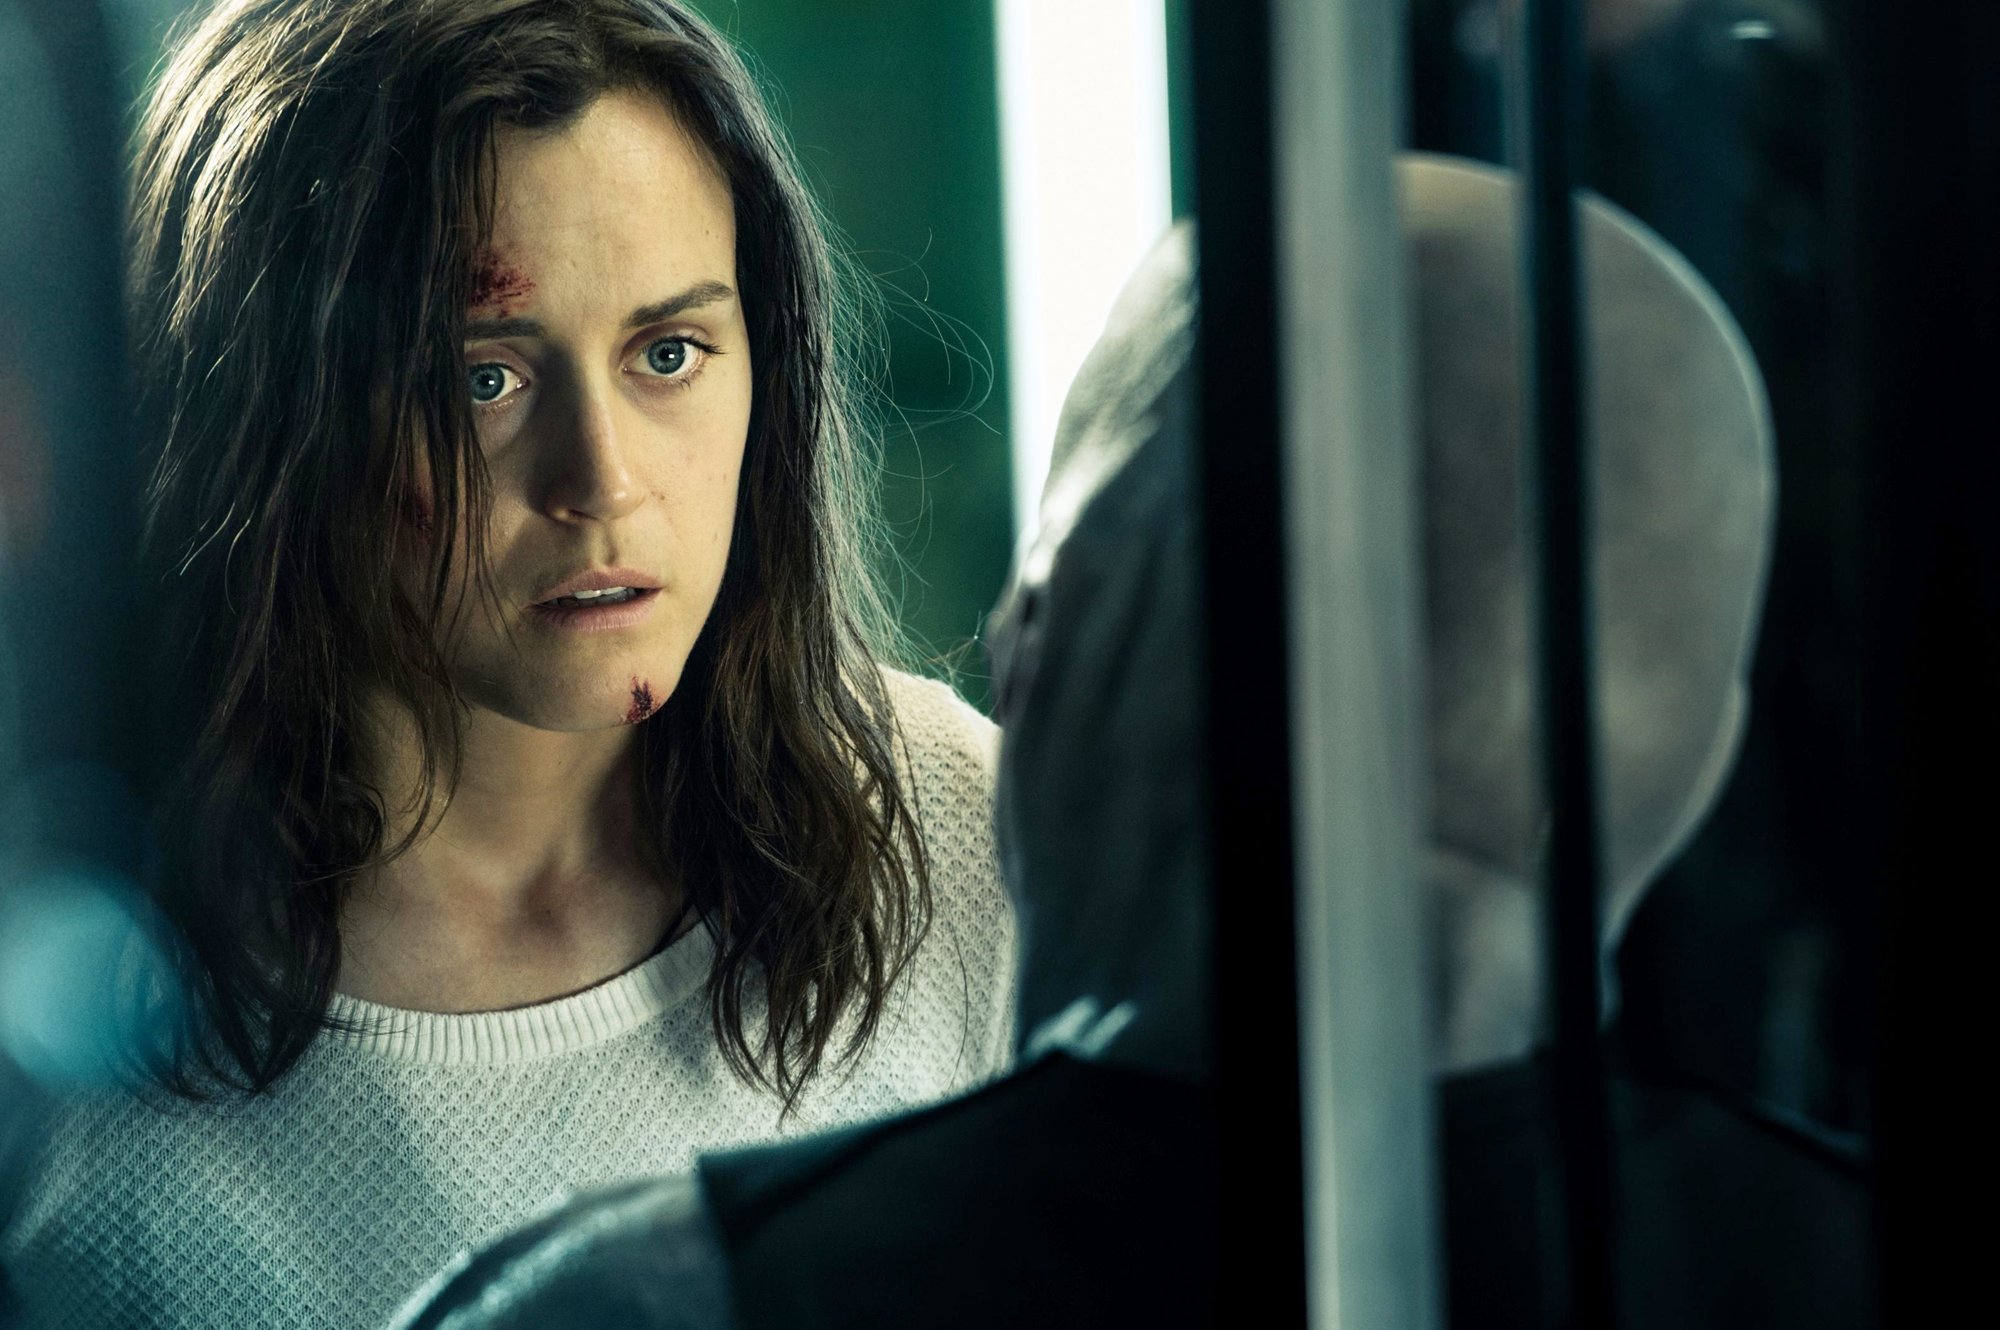 Taylor Schilling in Netflix's The Titan (2018)